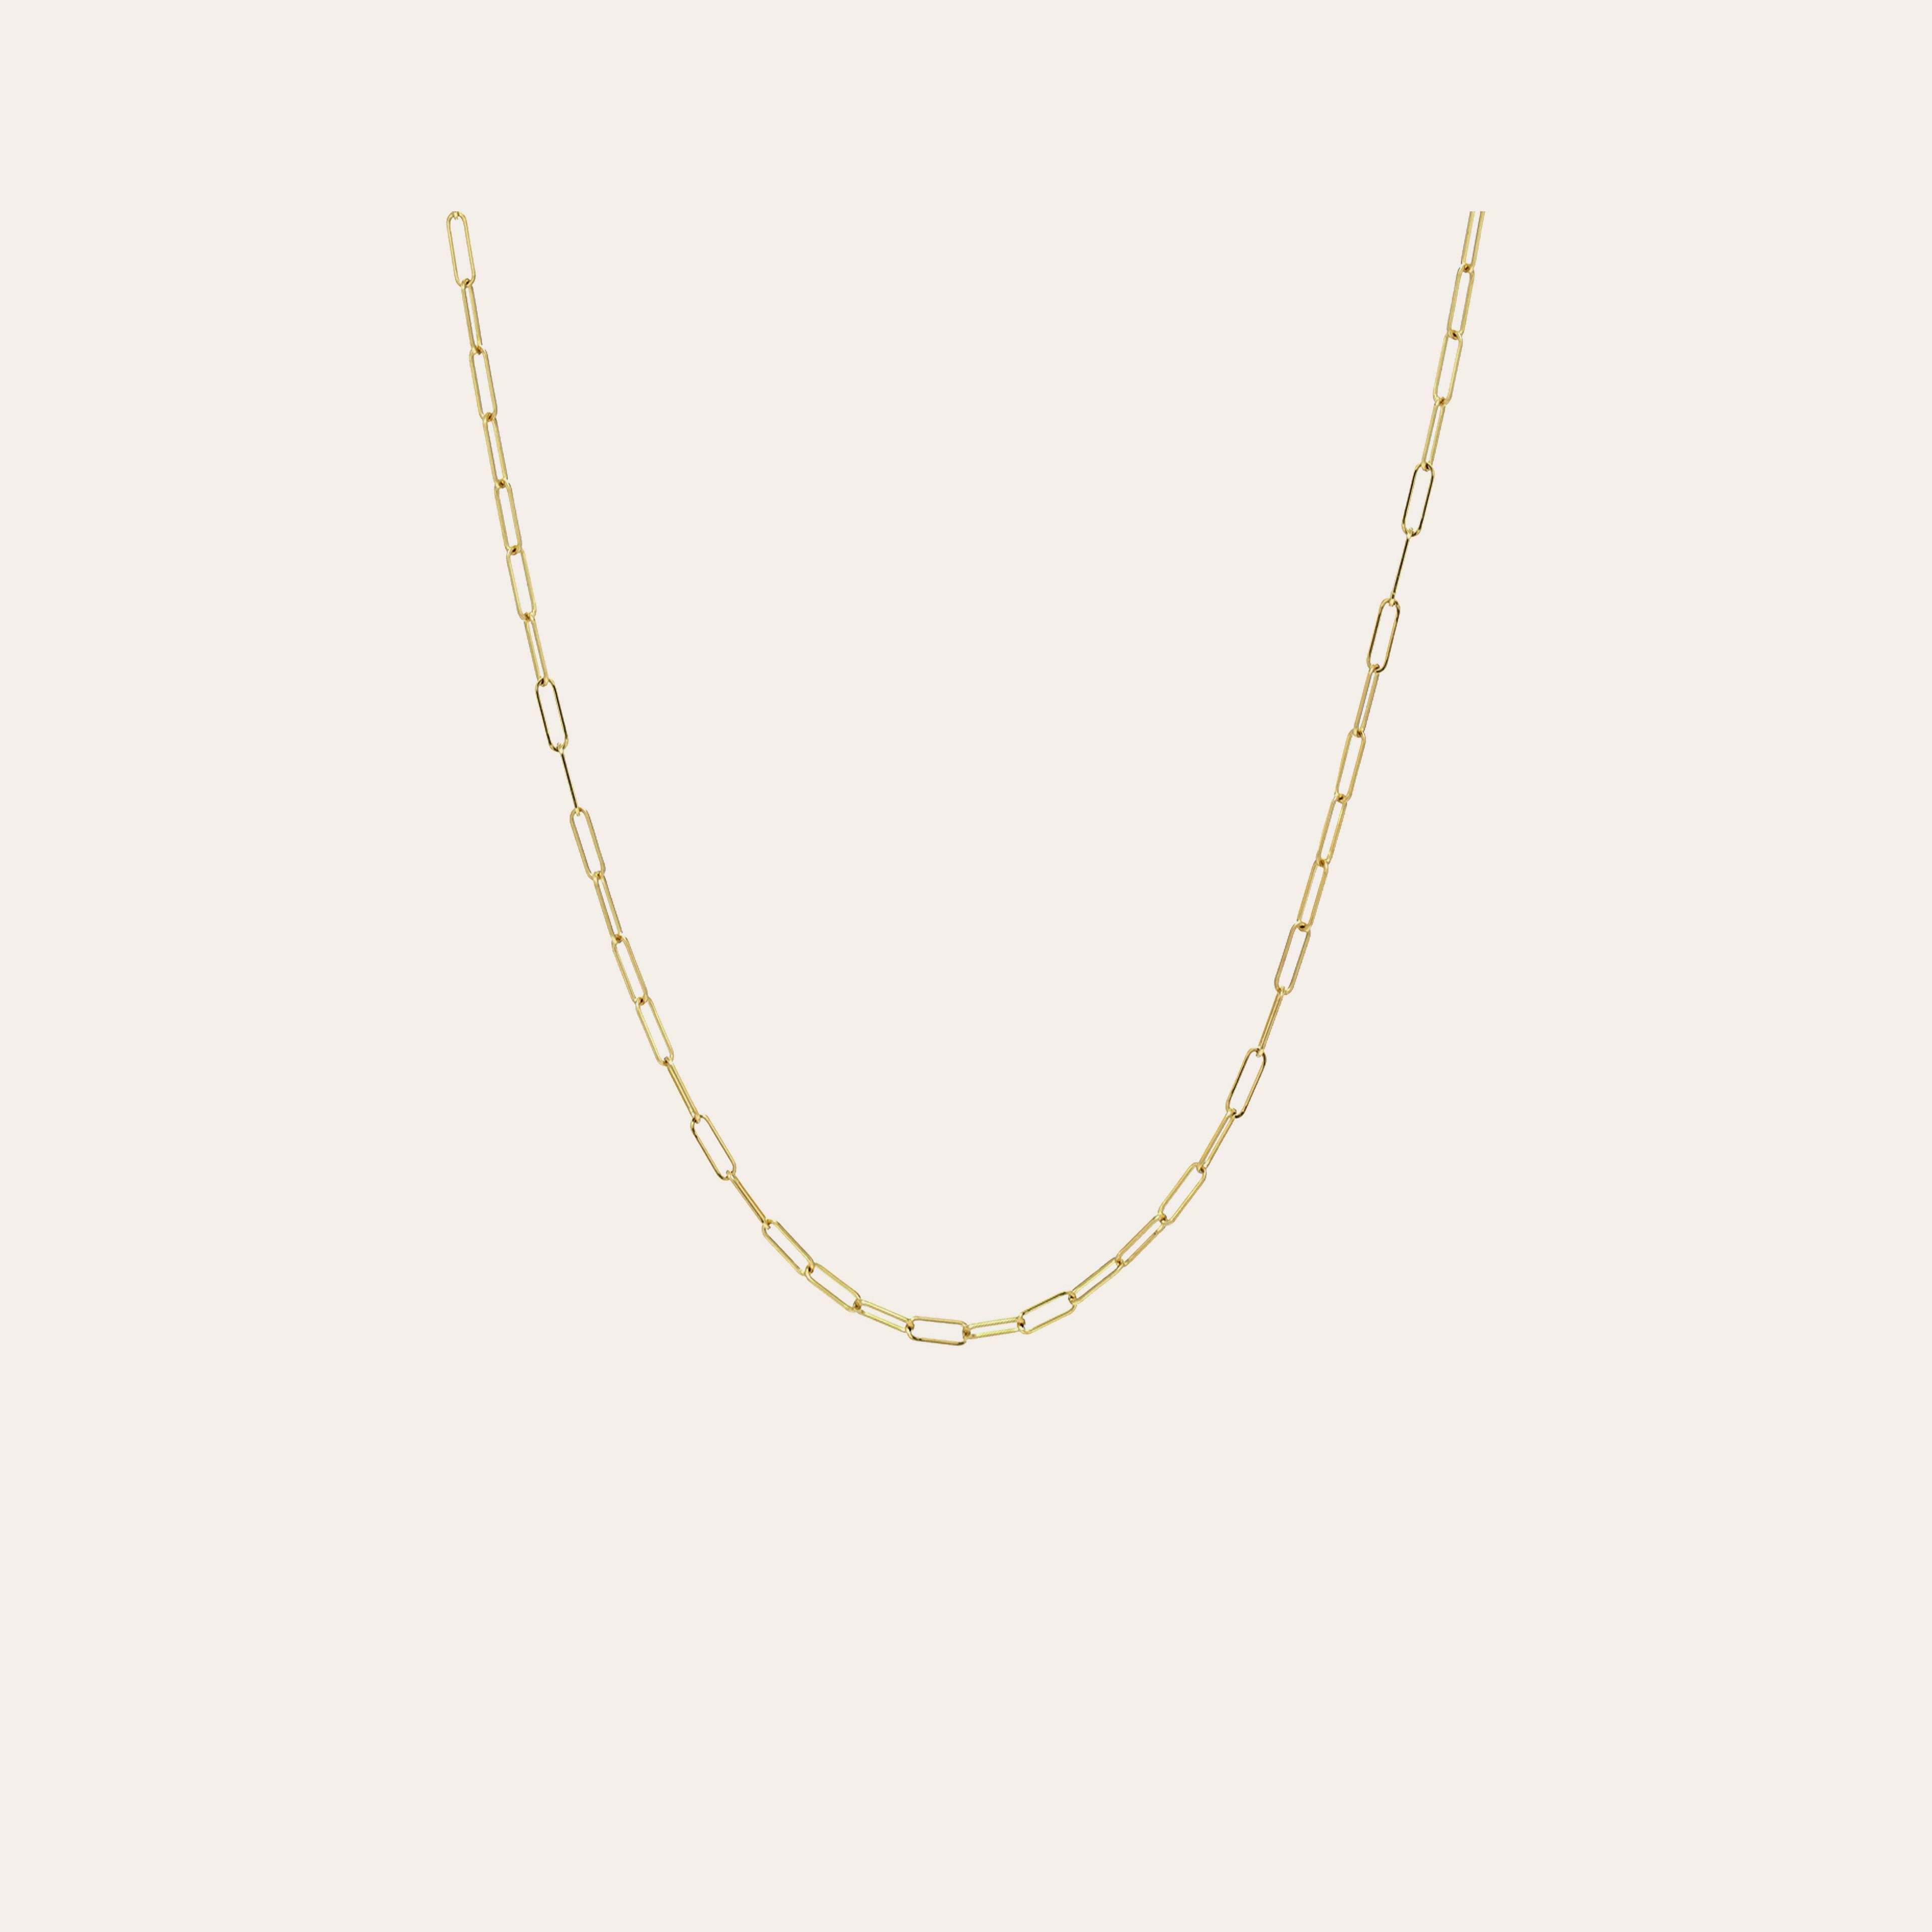 Zoe Lev Jewelry 14k Gold Open Link Chain Necklace on Marmalade